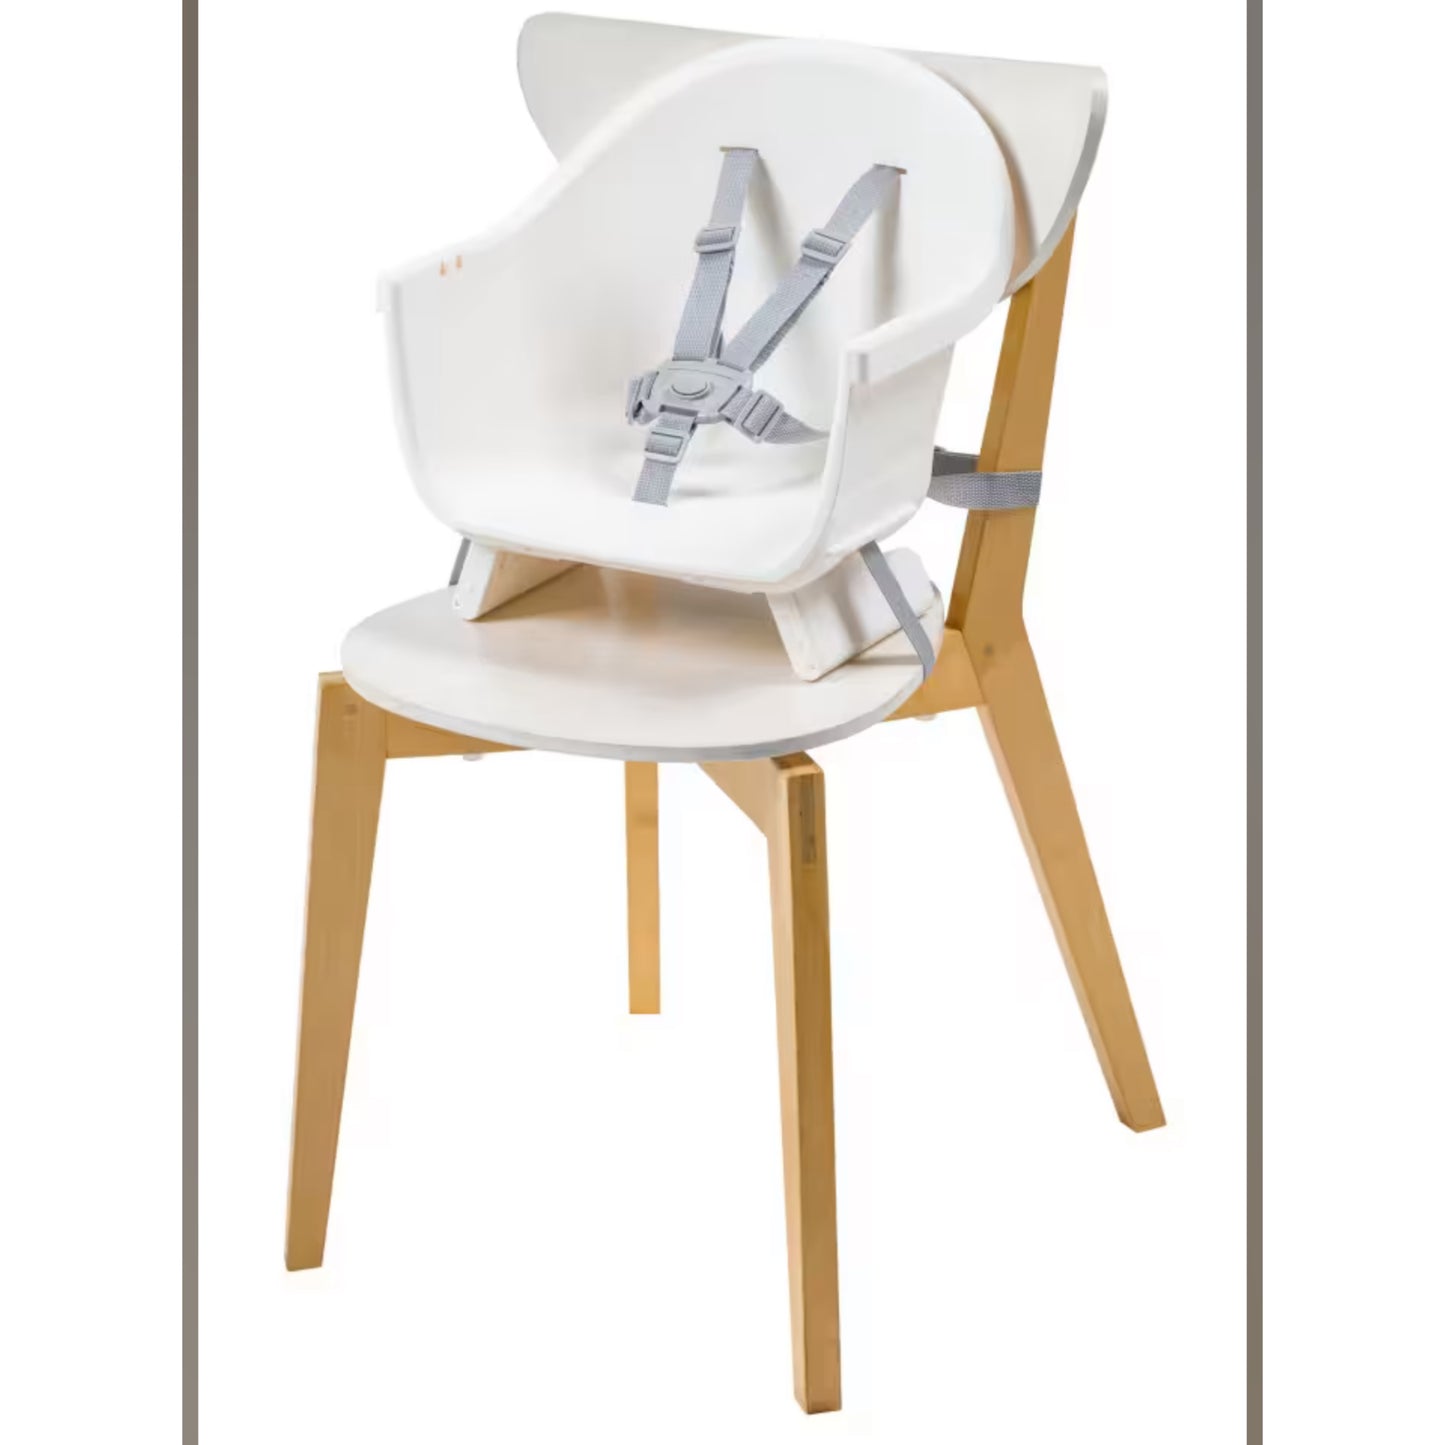 Moa 4-in-1 High Chair